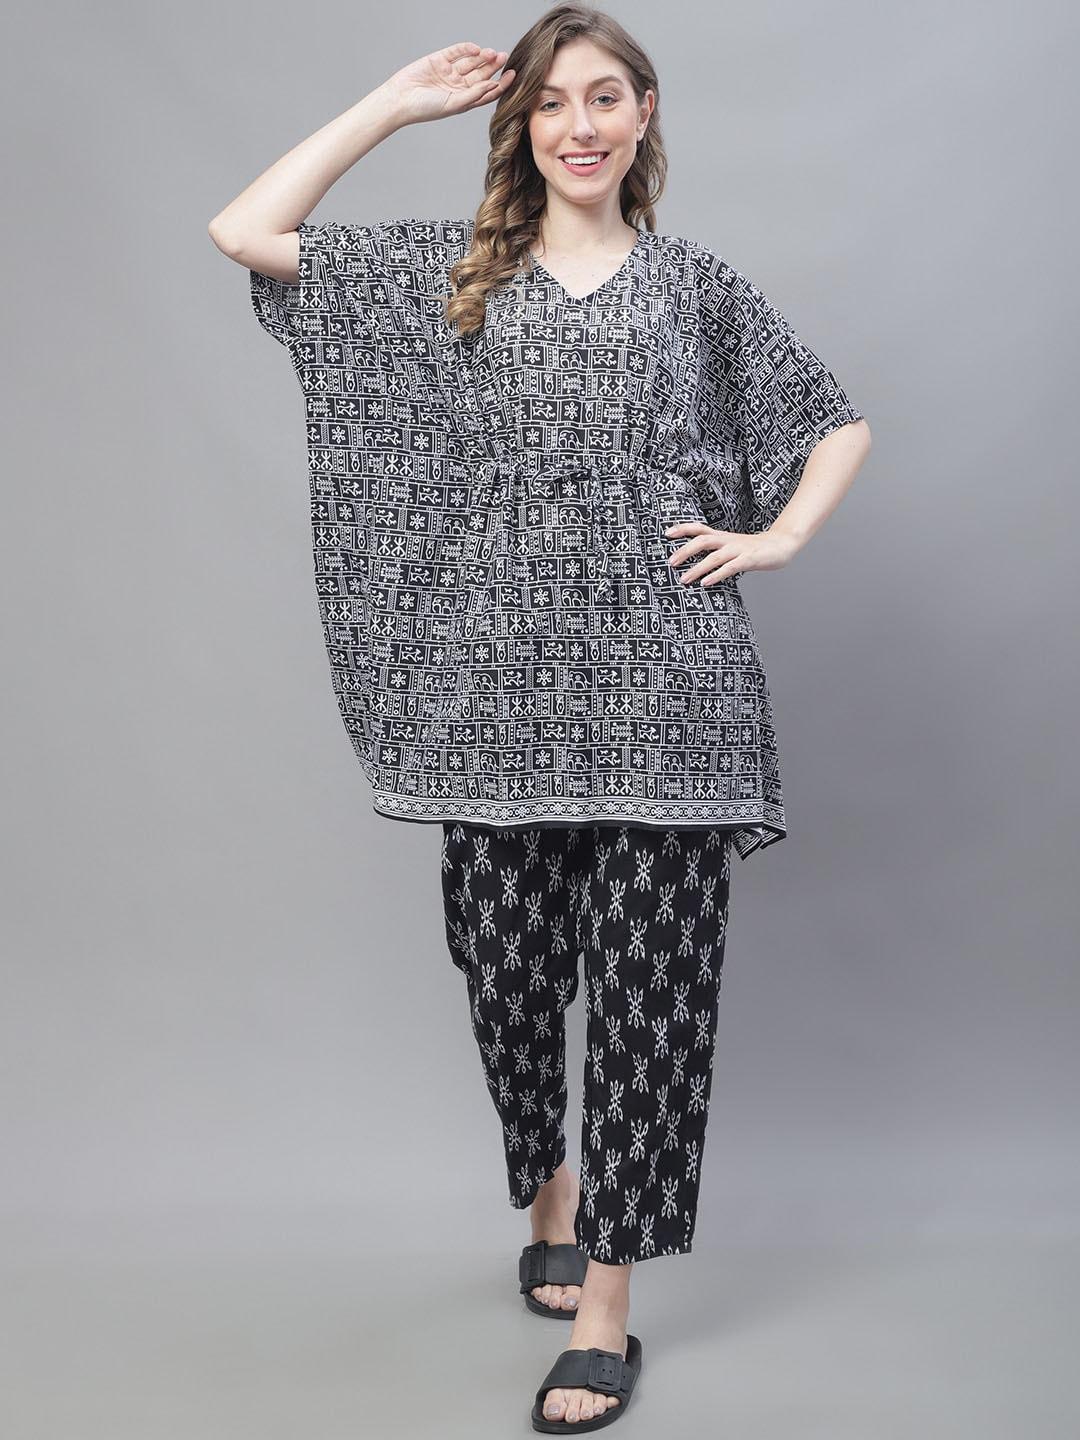 tag 7 bohemian printed pure cotton night suit